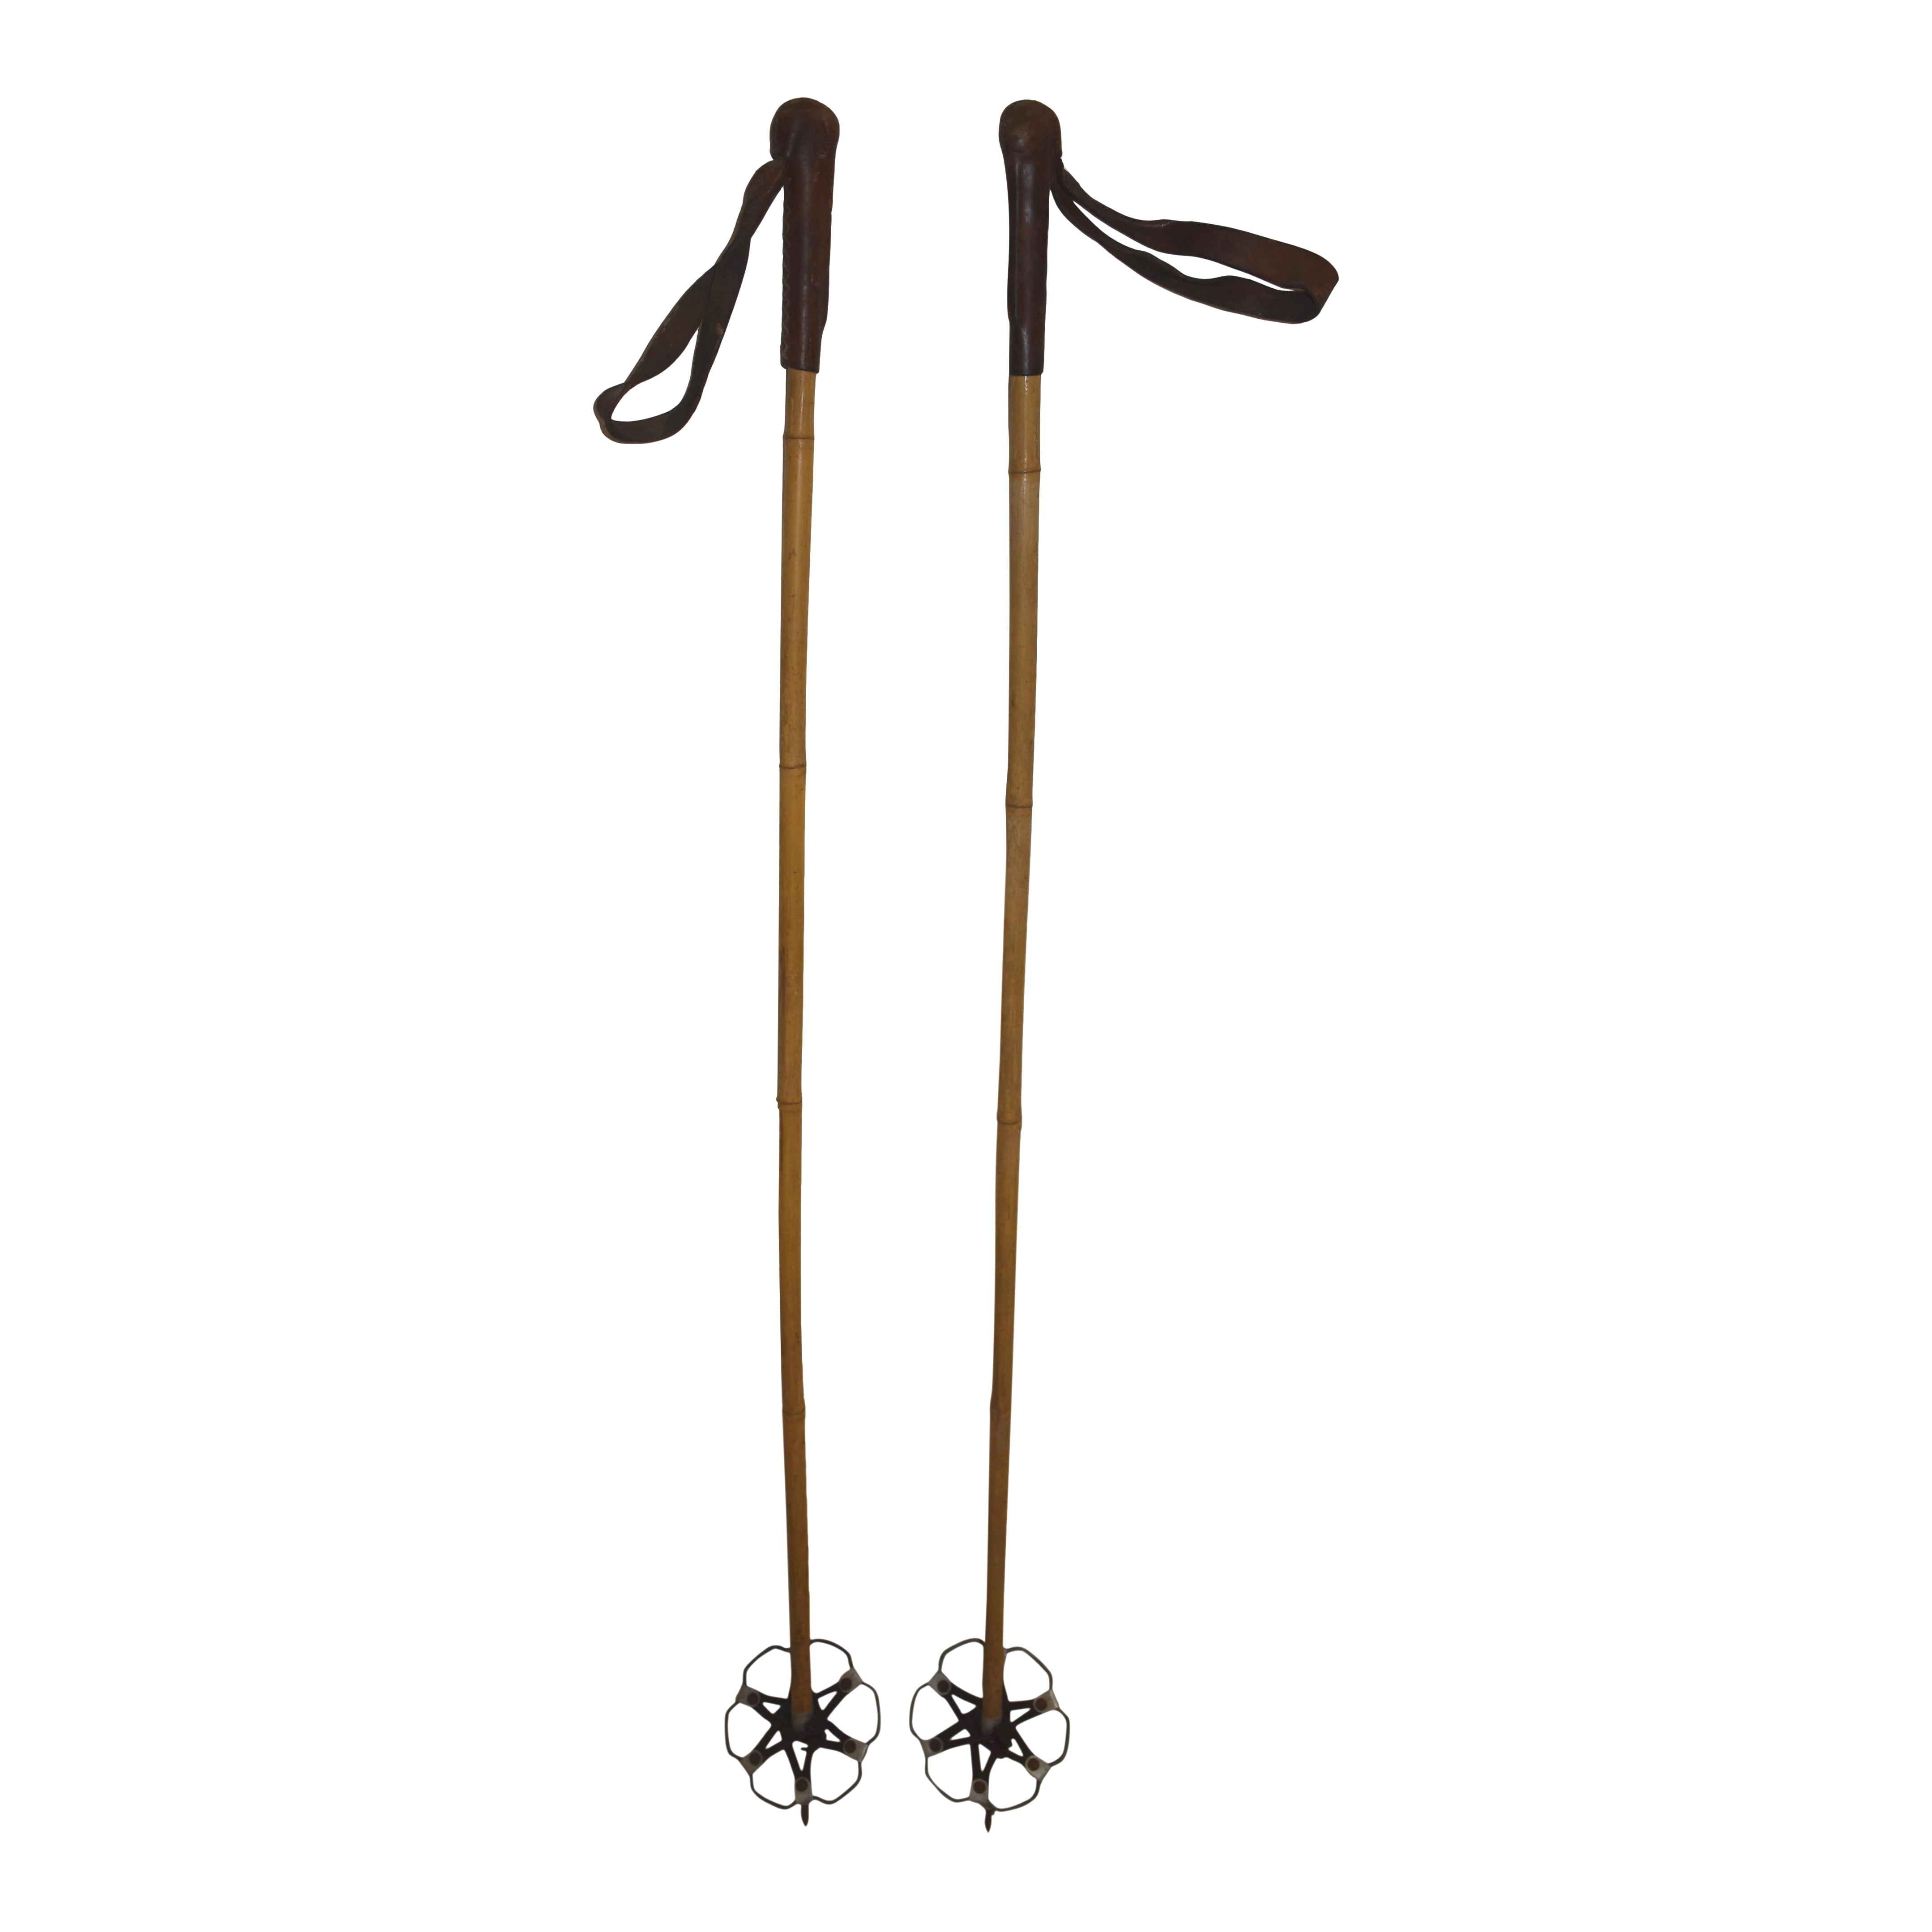 Bamboo Ski Poles with Leather Grips and Aluminum Baskets